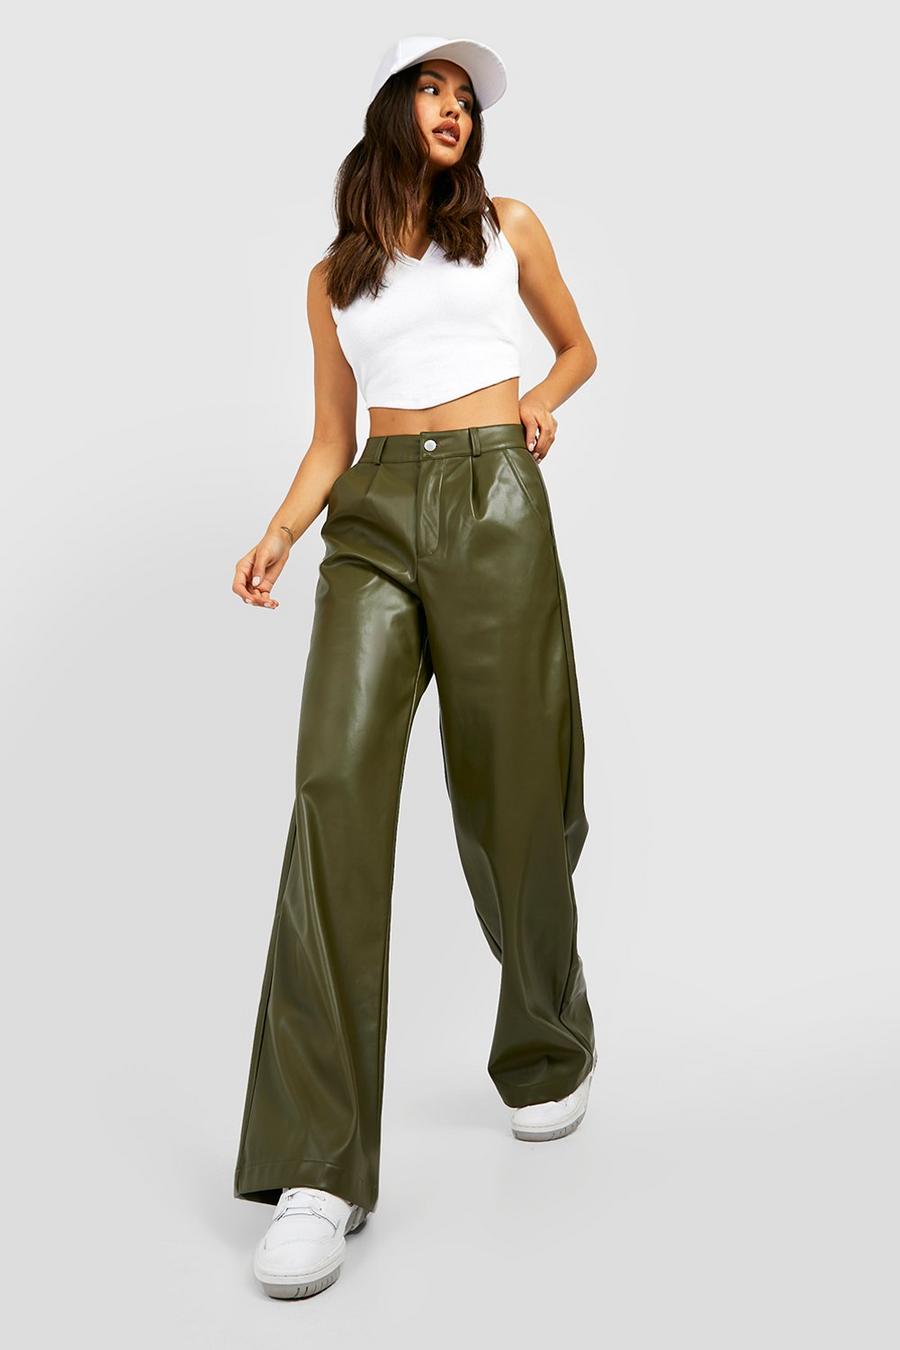 Khaki Faux Leather High Waisted Relax Fit Pants